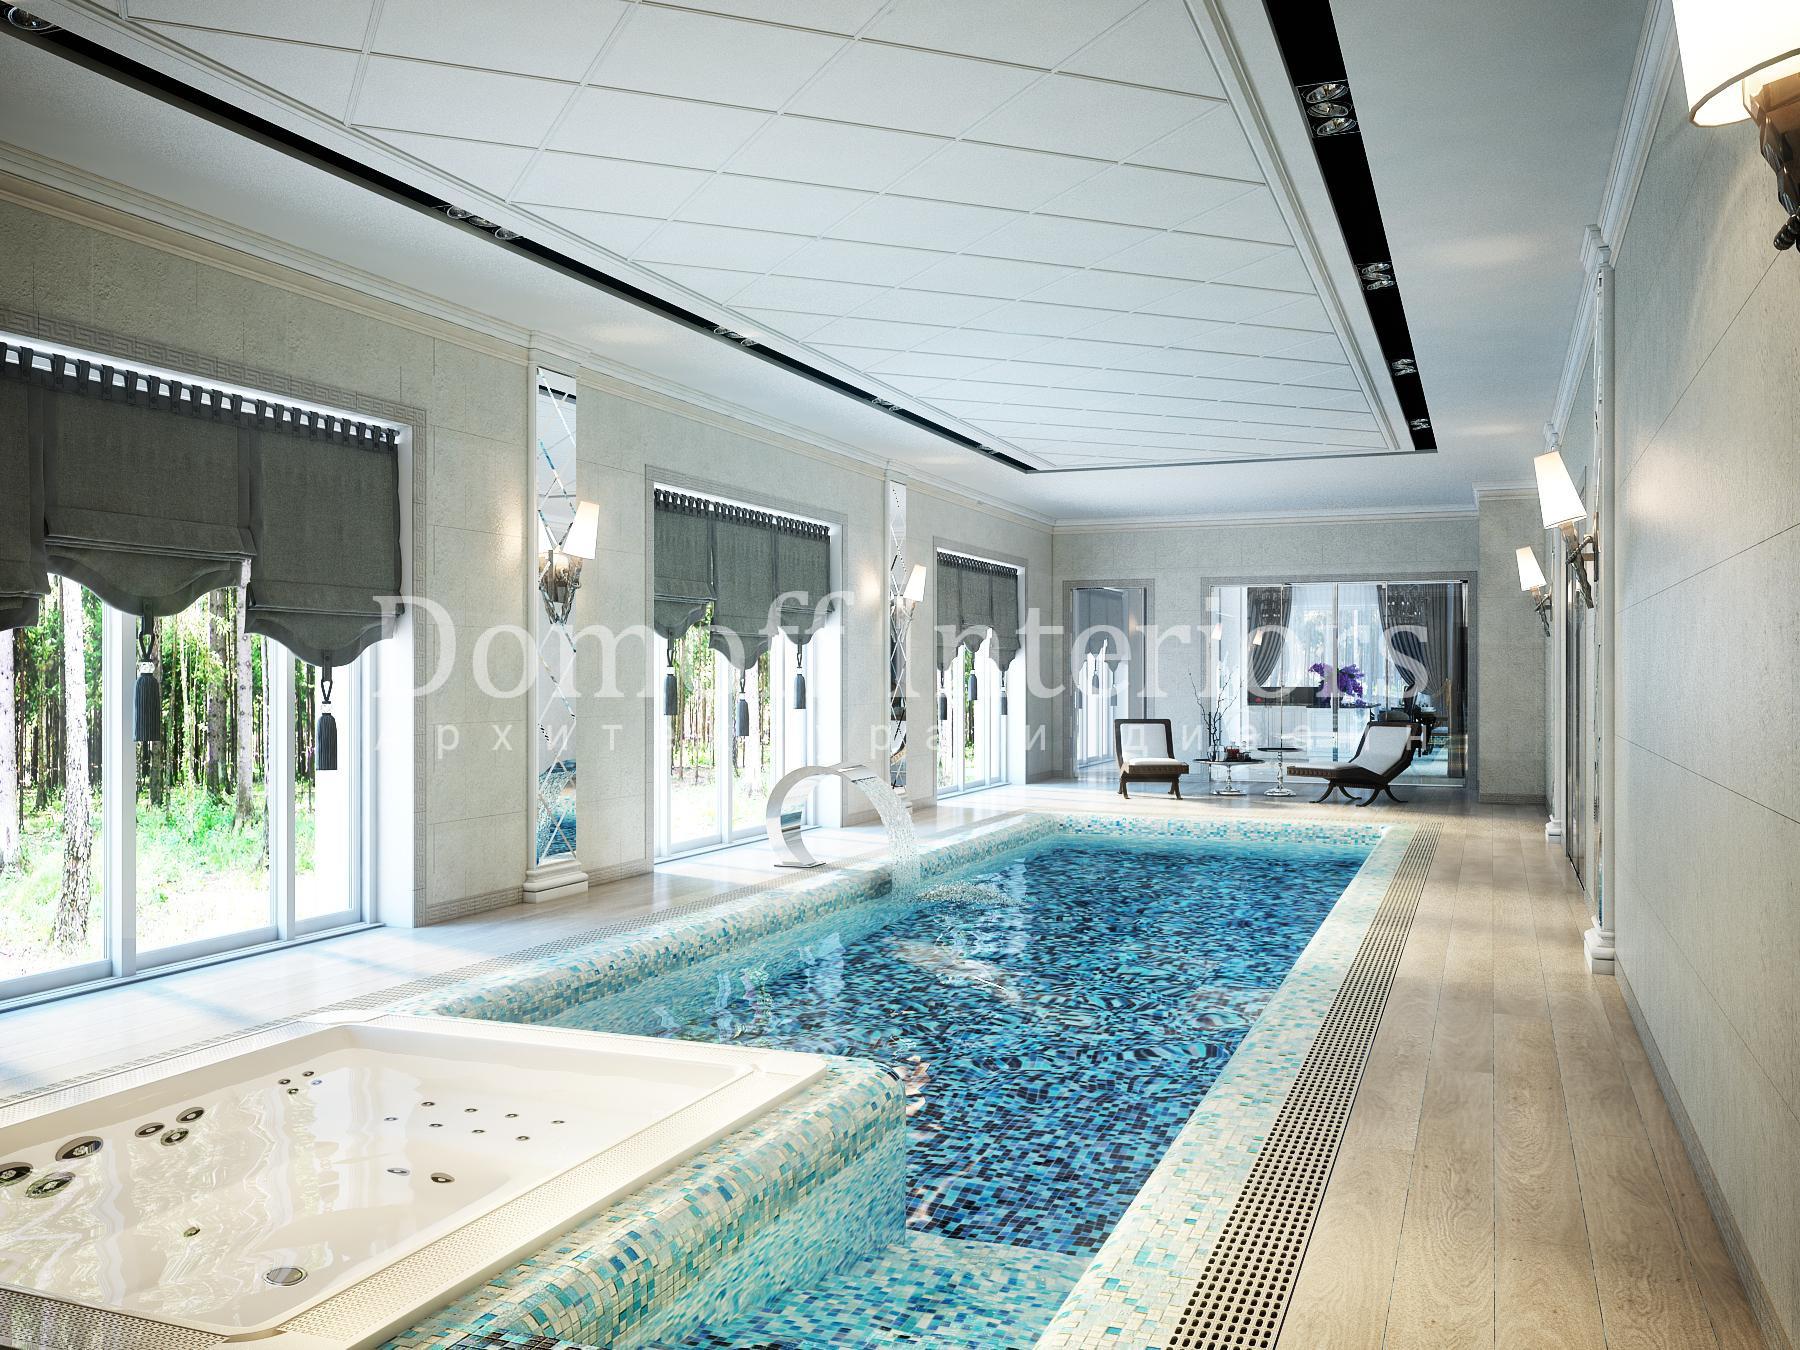 Swimming pool made in the style of Contemporary classics